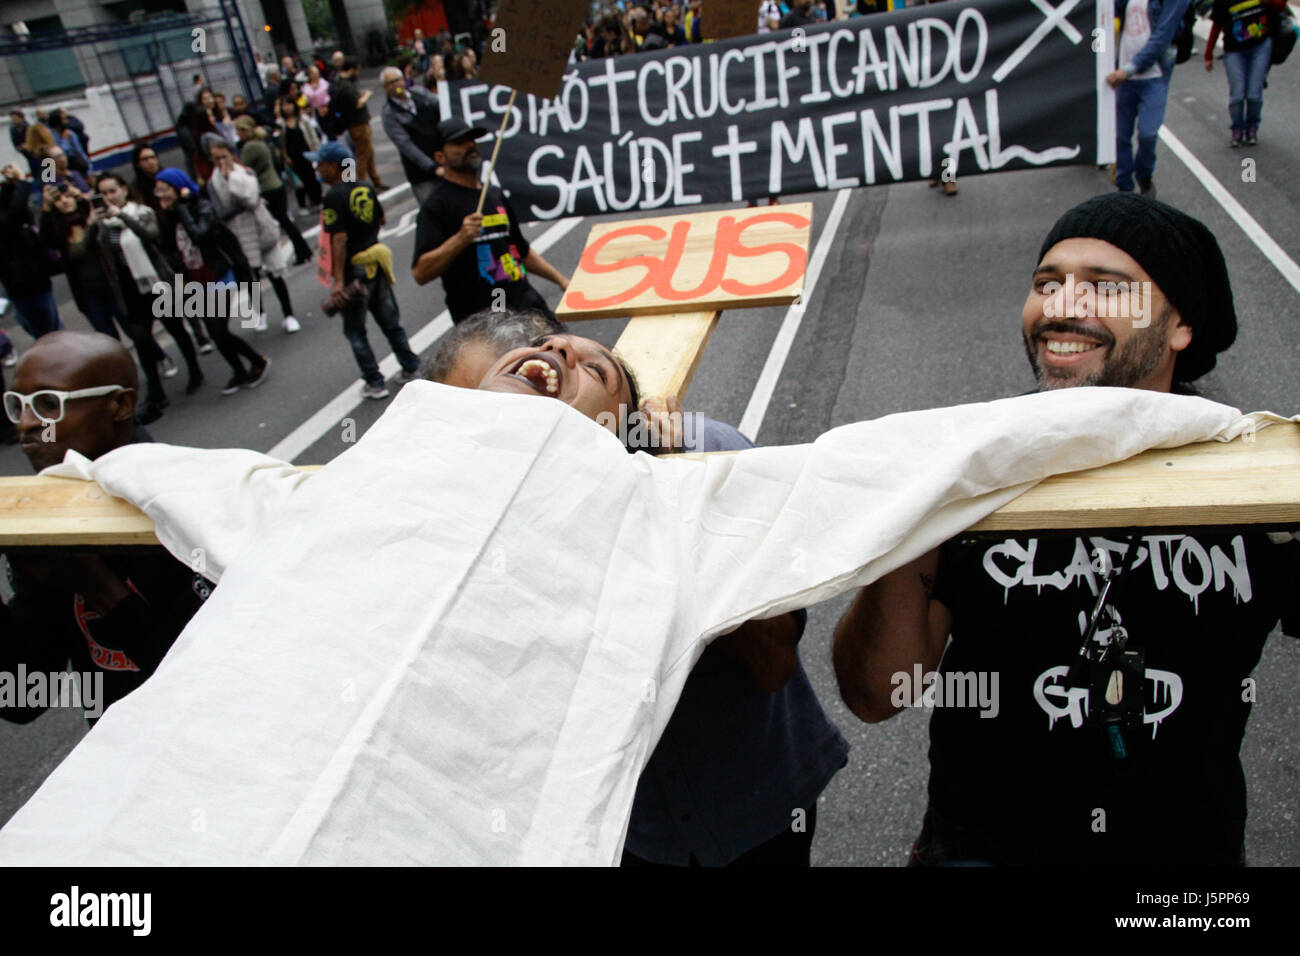 São Paulo, Brazil. 18th May, 2017. Protesters from various social movements are doing the National Day of Anti-Manicomial Struggle, at Masp on Avenida Paulista in São Paulo, Brazil, on Thursday (18). The act is against the mercantilization of the disease; Against a privatizing and authoritarian sanitary reform; By a democratic and popular health reform; By agrarian and urban reform; By the free and independent organization of the workers; The right to organize public services. May 18, 2017. (Photo: Fábio Vieira/FotoRua) Credit: Fábio Vieira/Alamy Live News Stock Photo